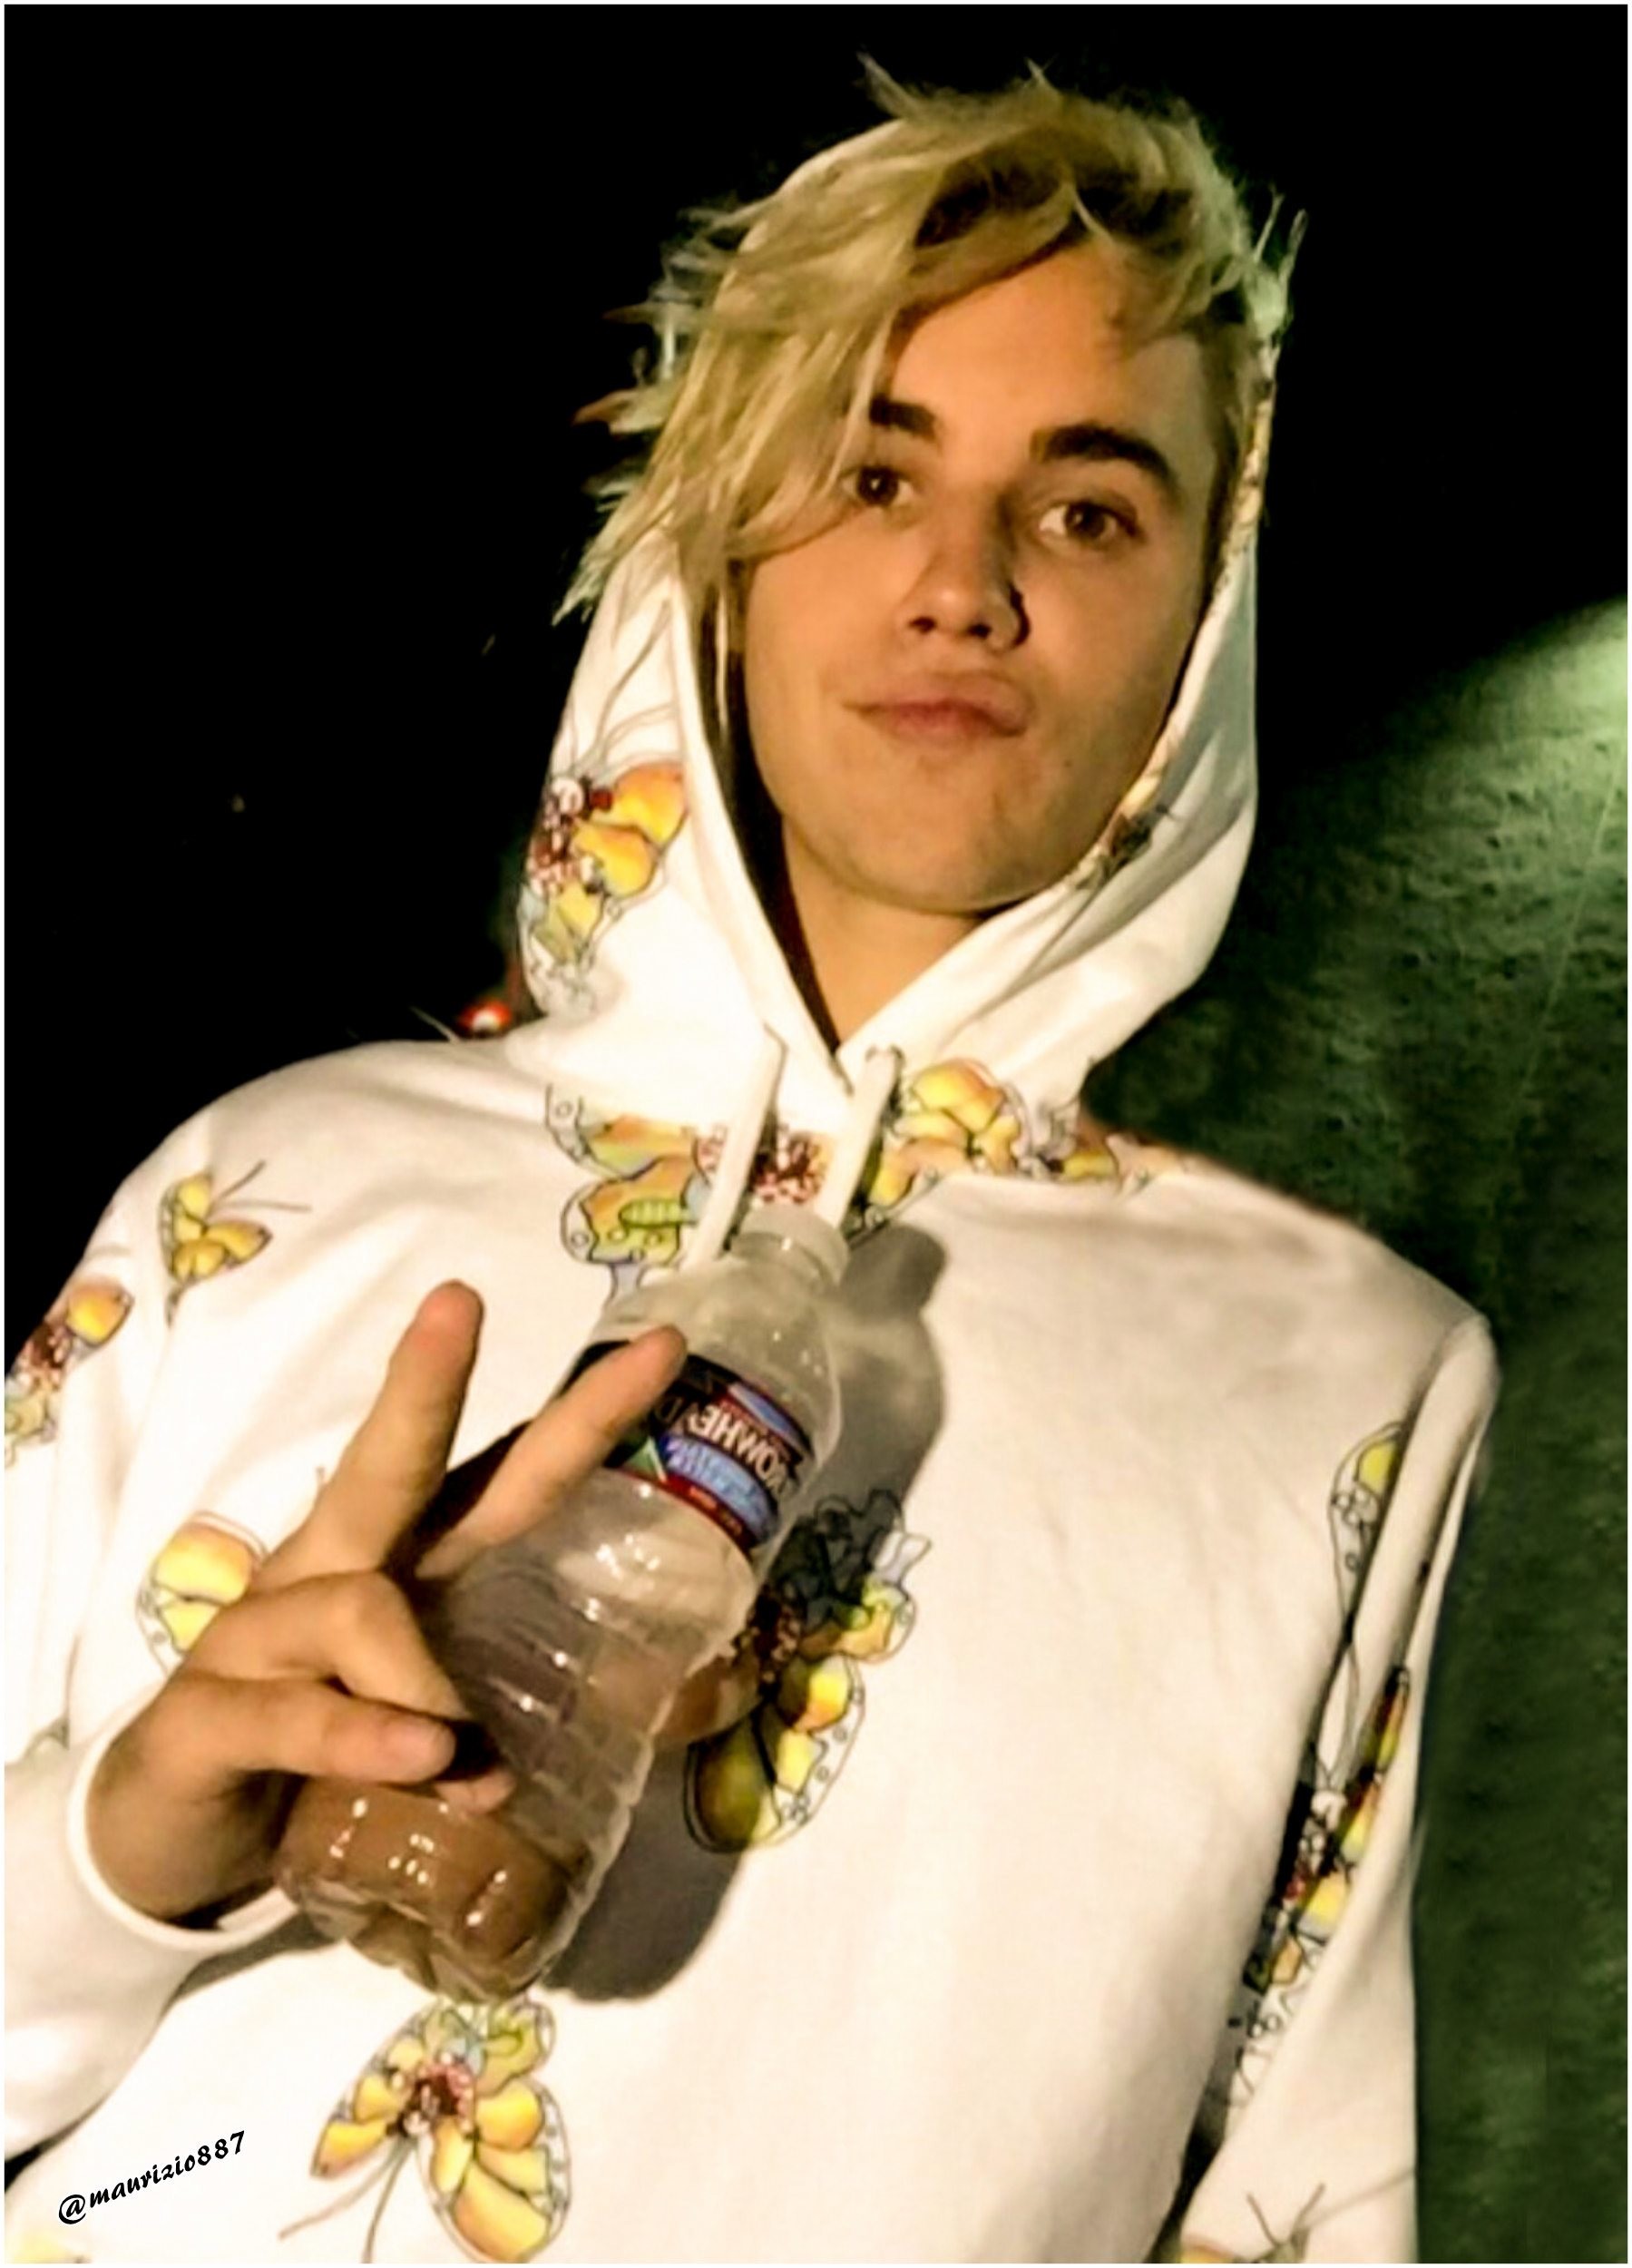 1799x2500 justin HD Wallpaper and background photos of justin for fans of Justin  Bieber images.